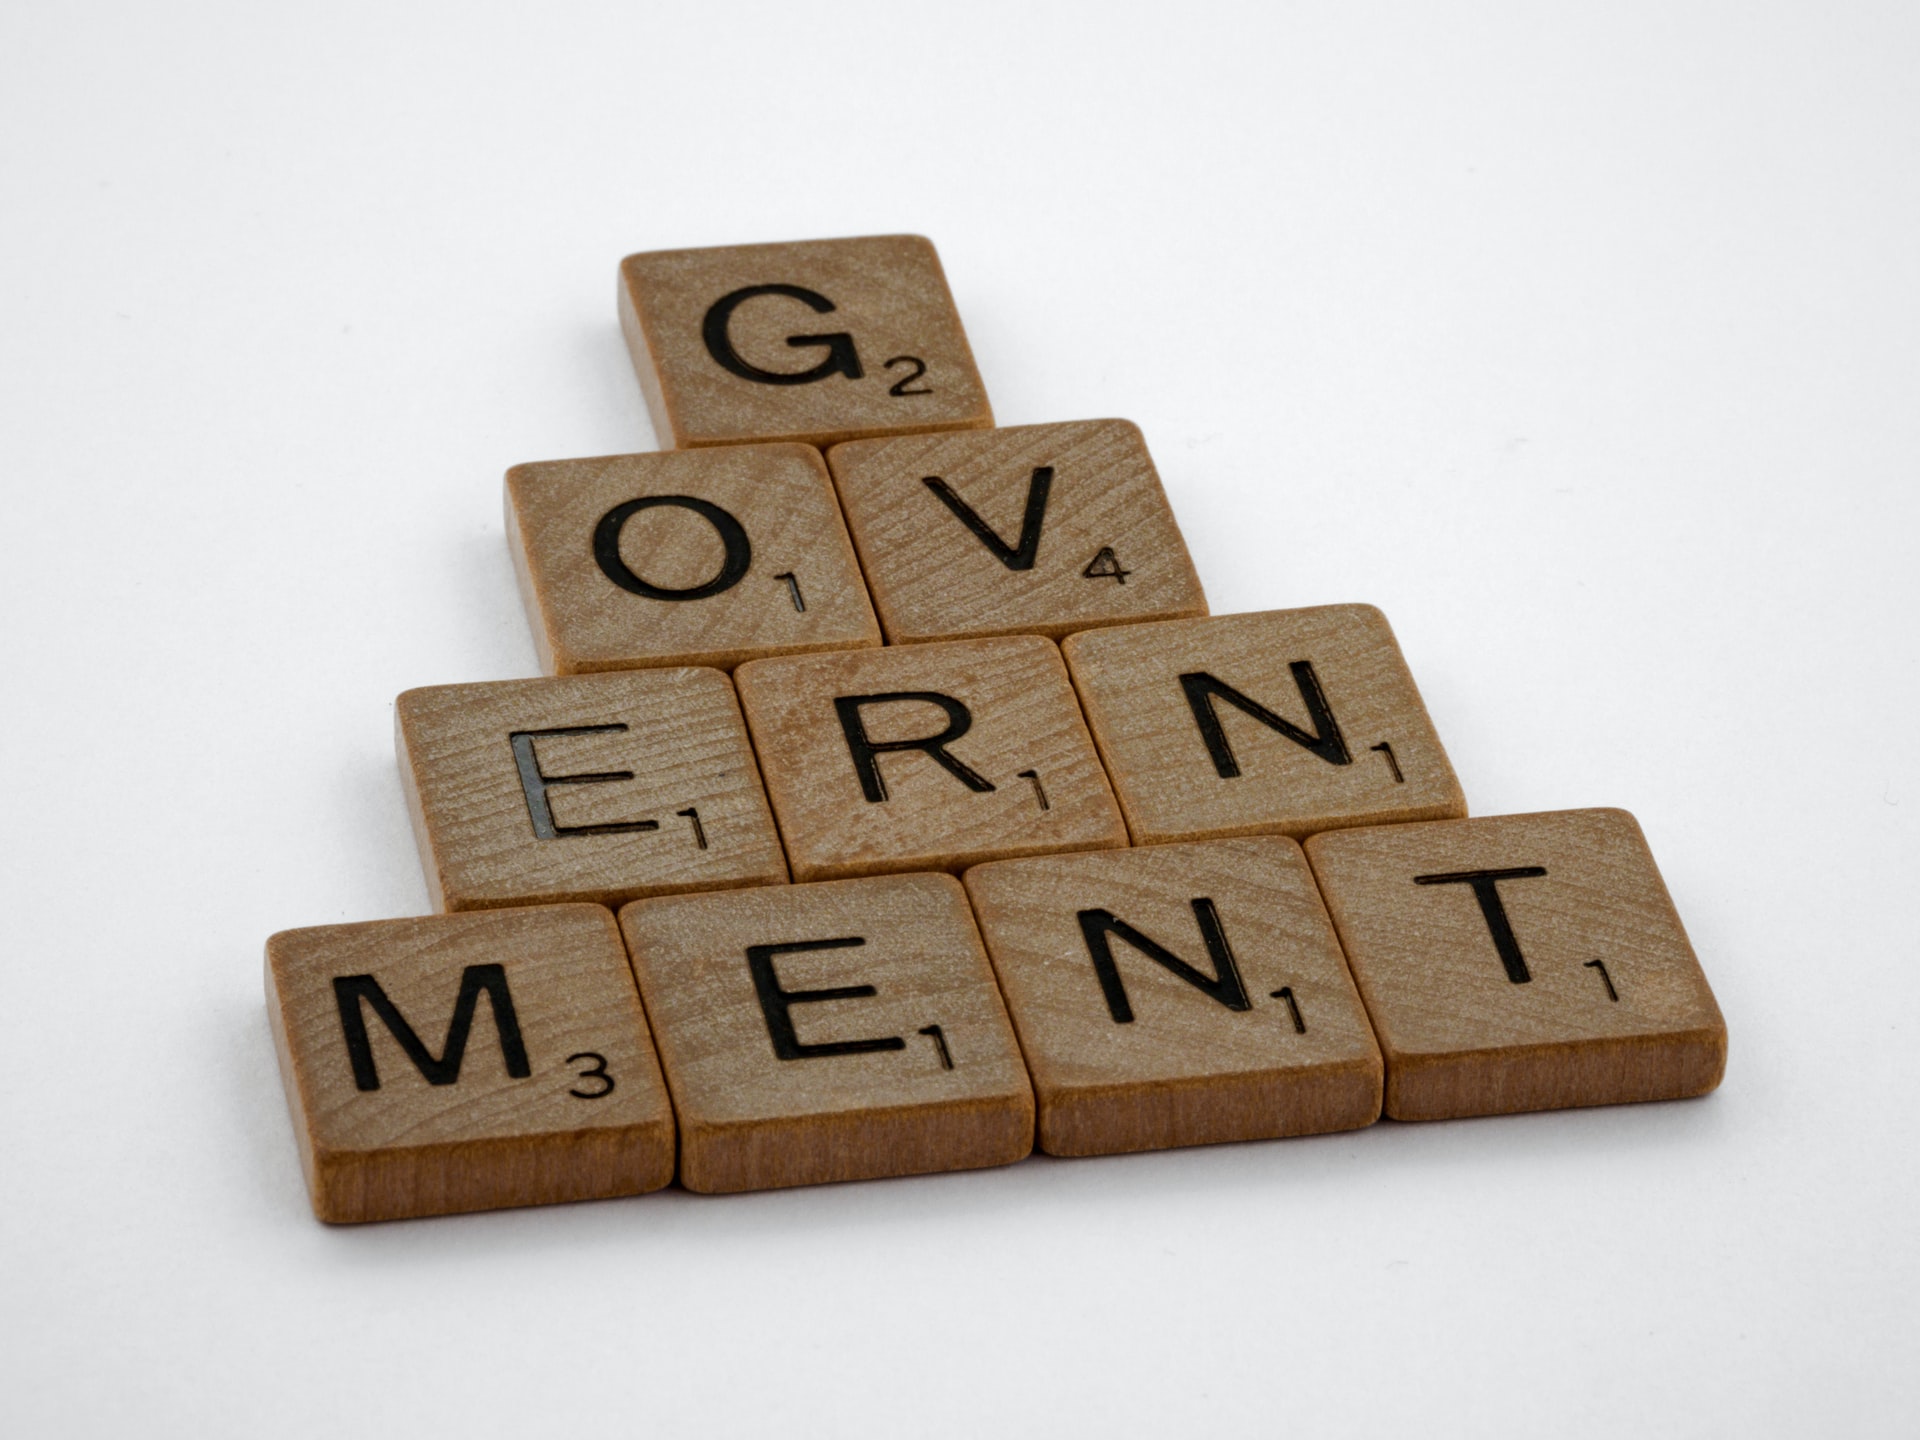 Scrabble pieces forming the word Government